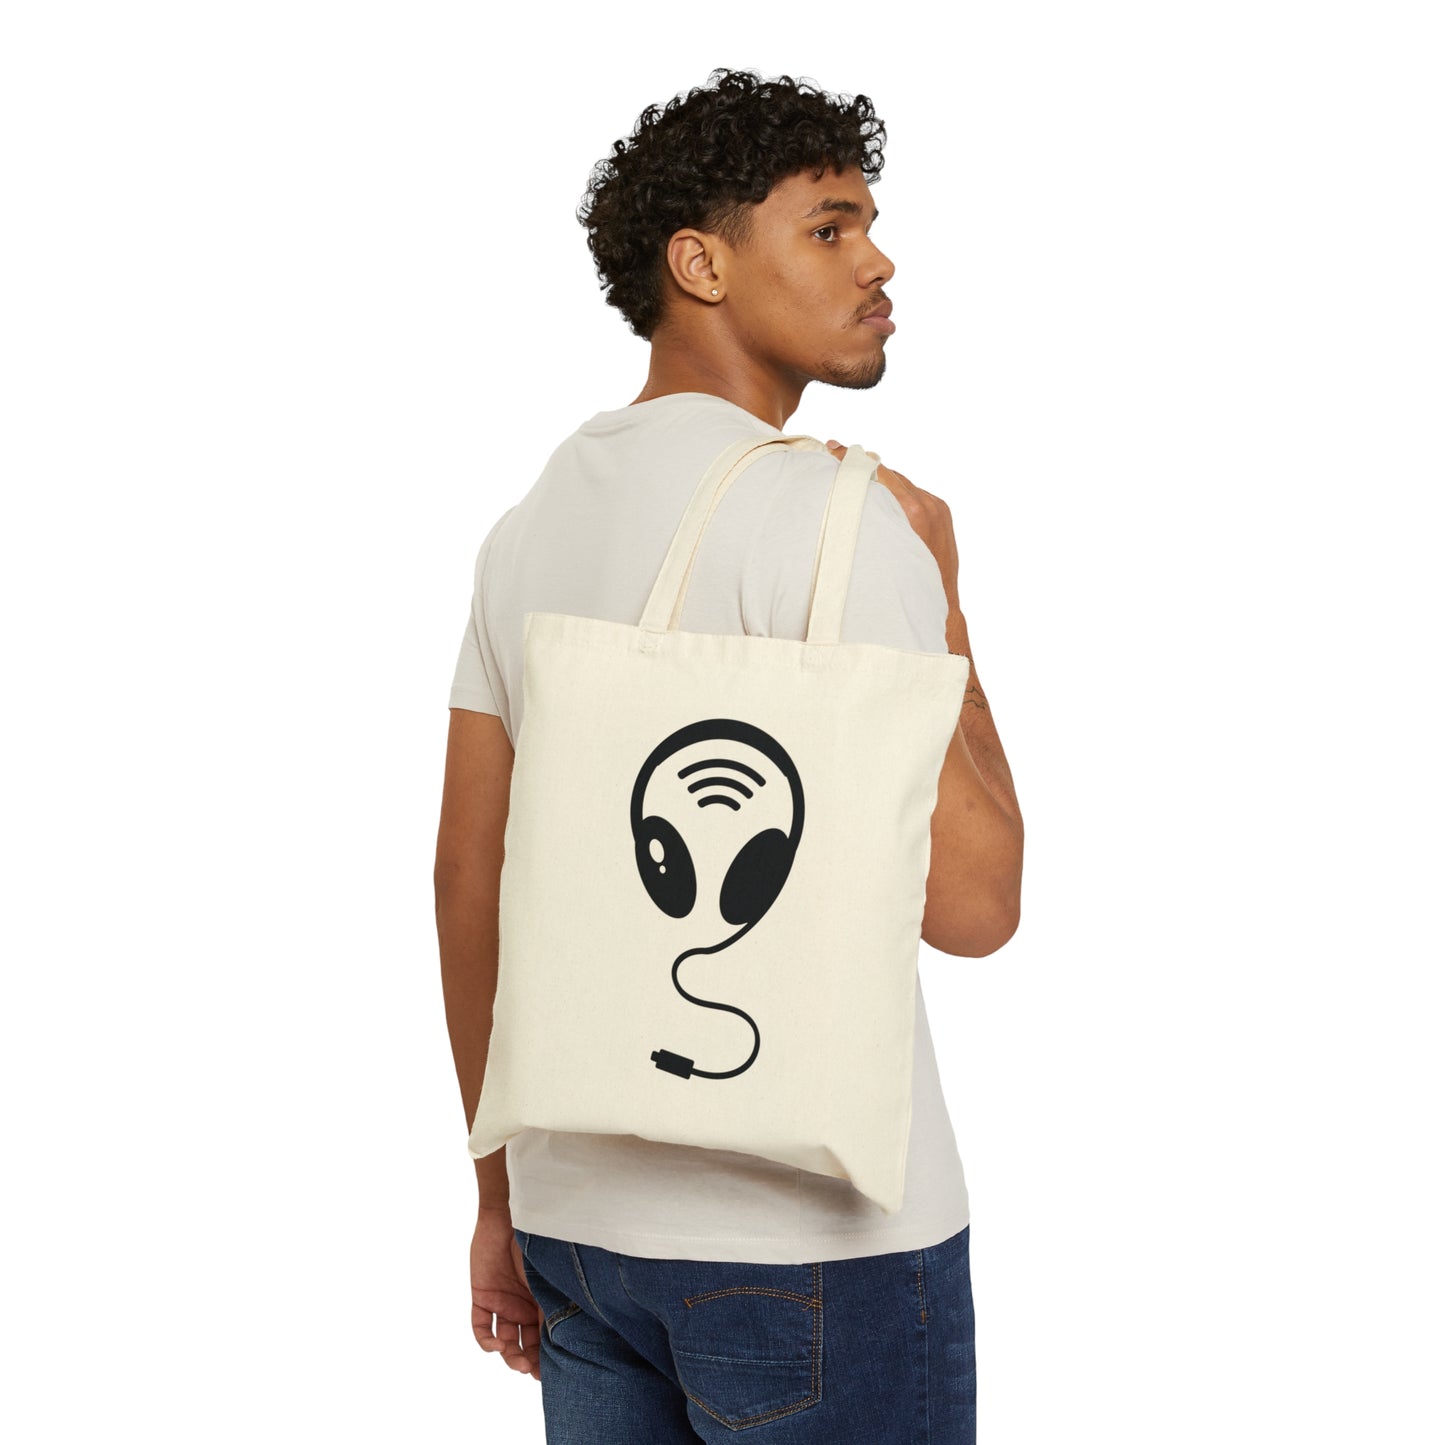 Aliens Headphones Humor Saying Quotes Black Canvas Shopping Cotton Tote Bag